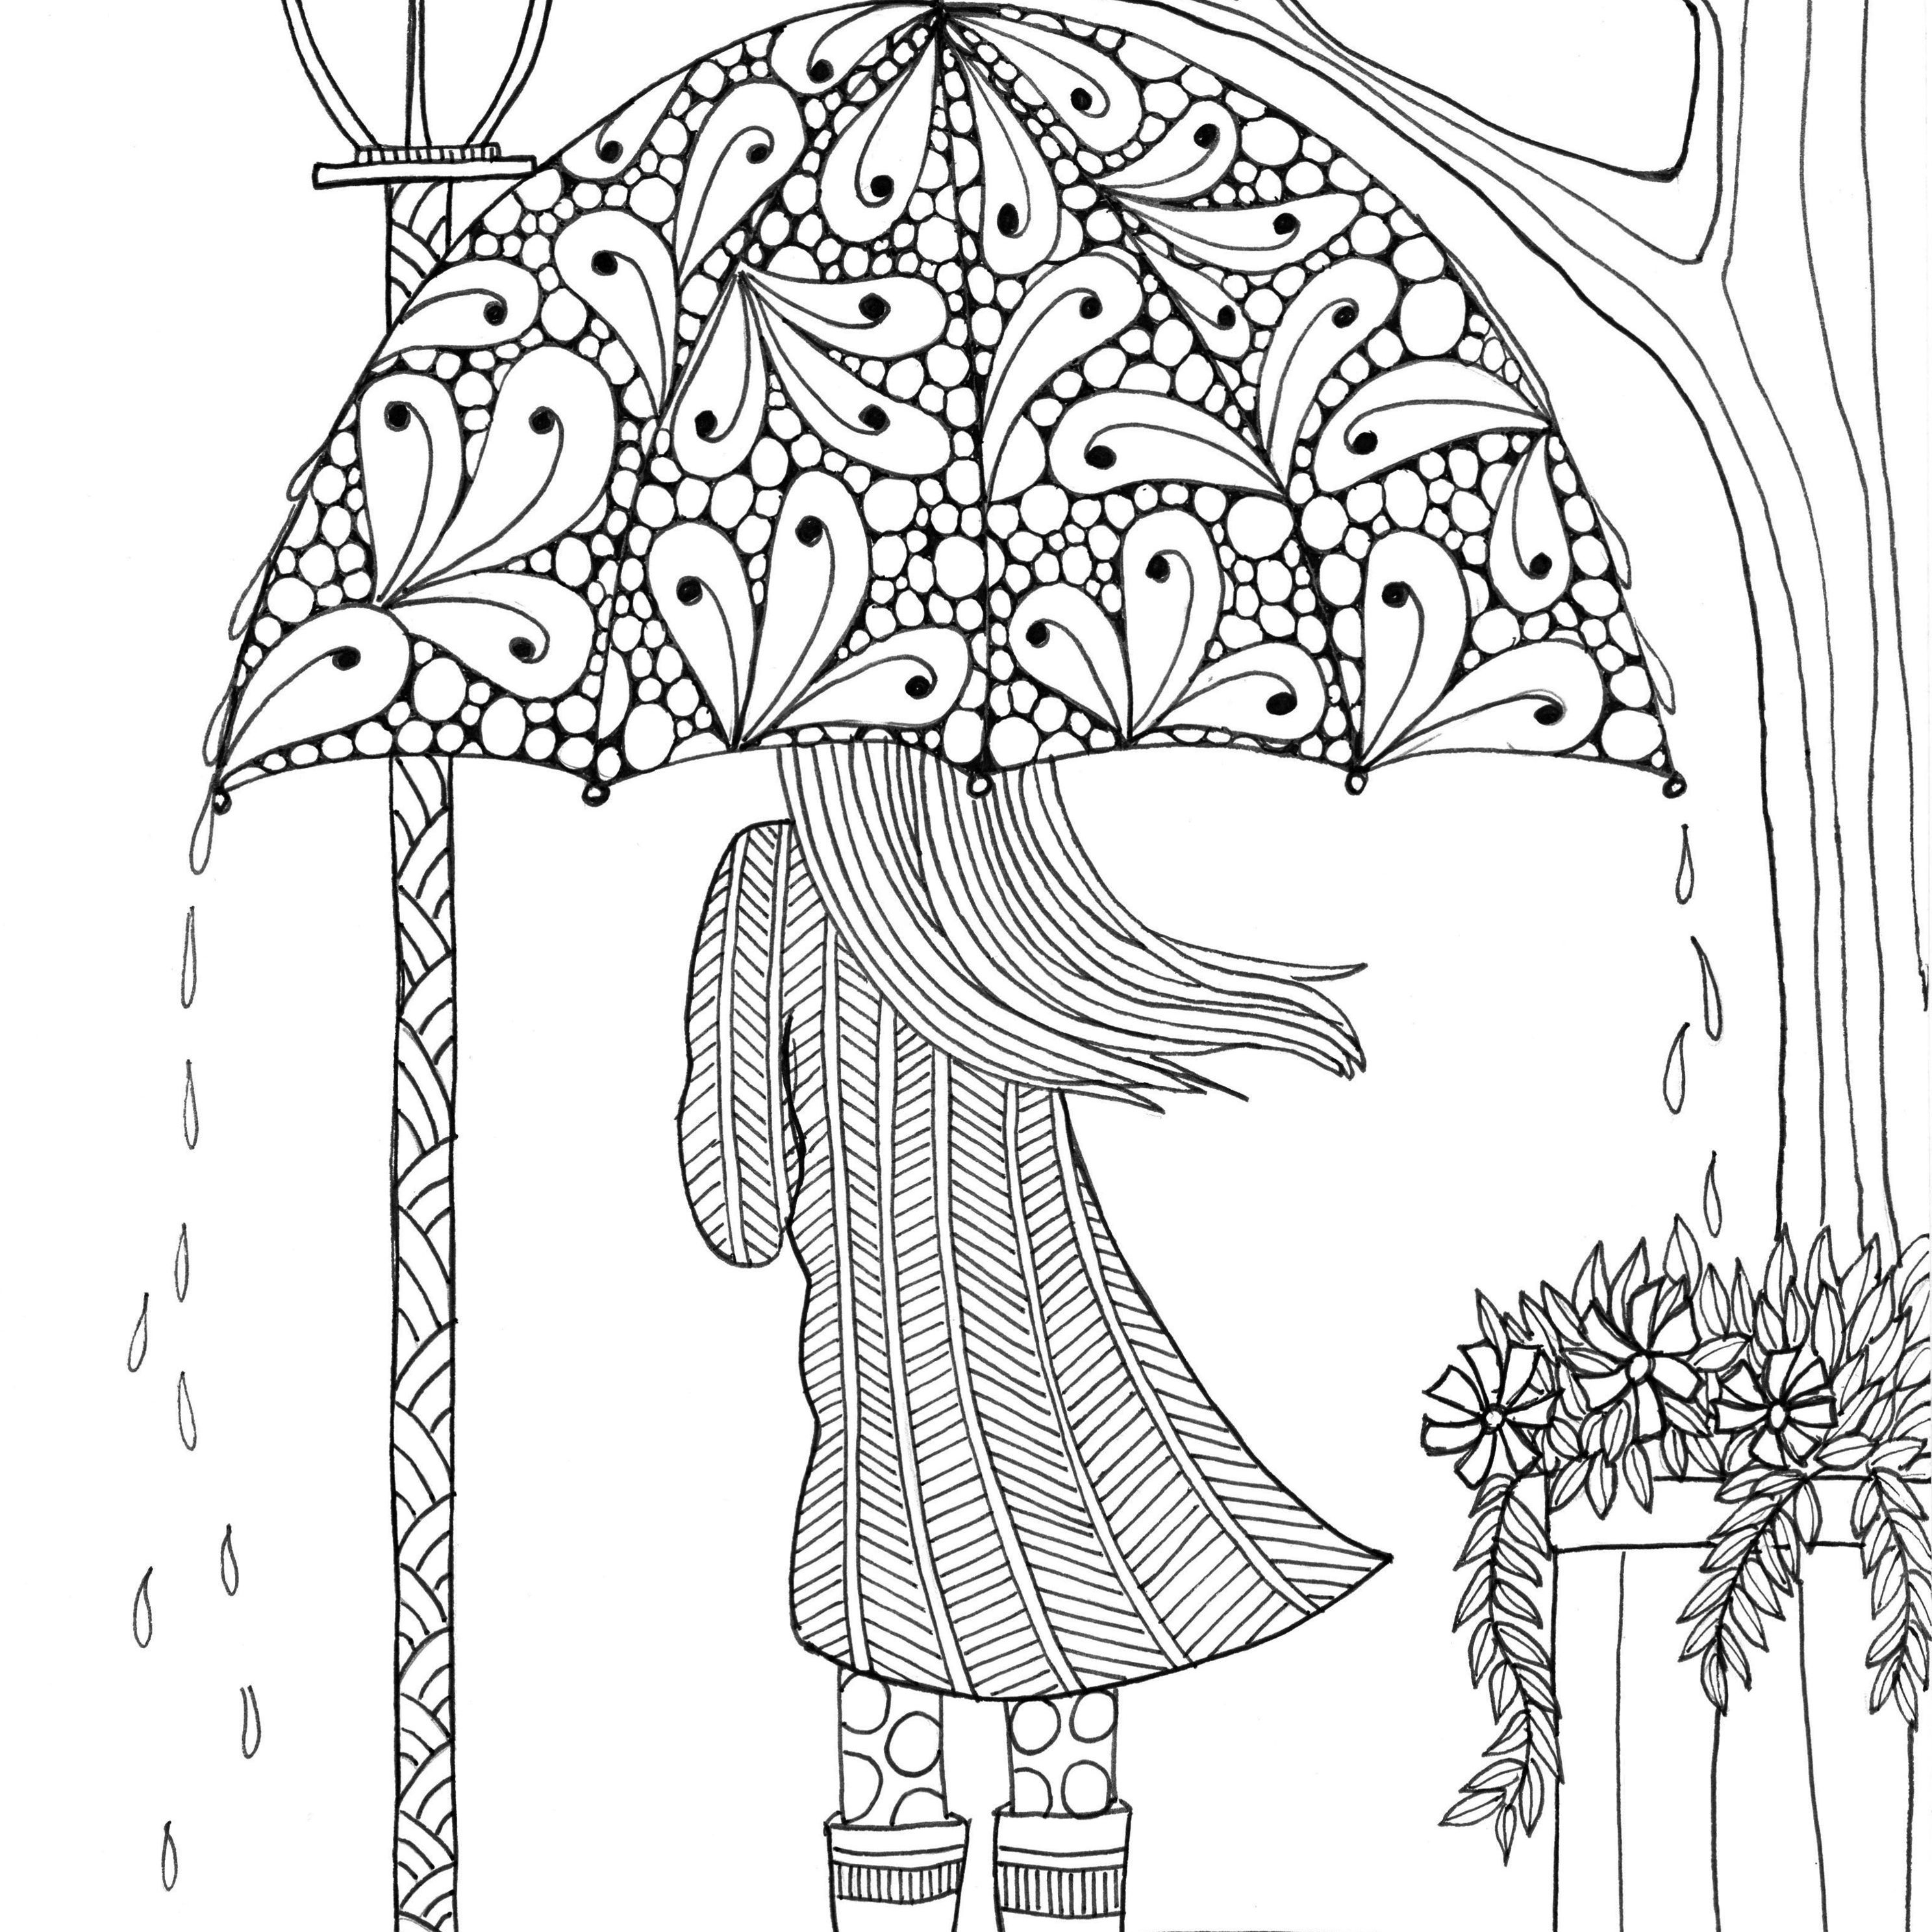 Free, Printable Coloring Pages For Adults - Free Printable Summer Coloring Pages For Adults